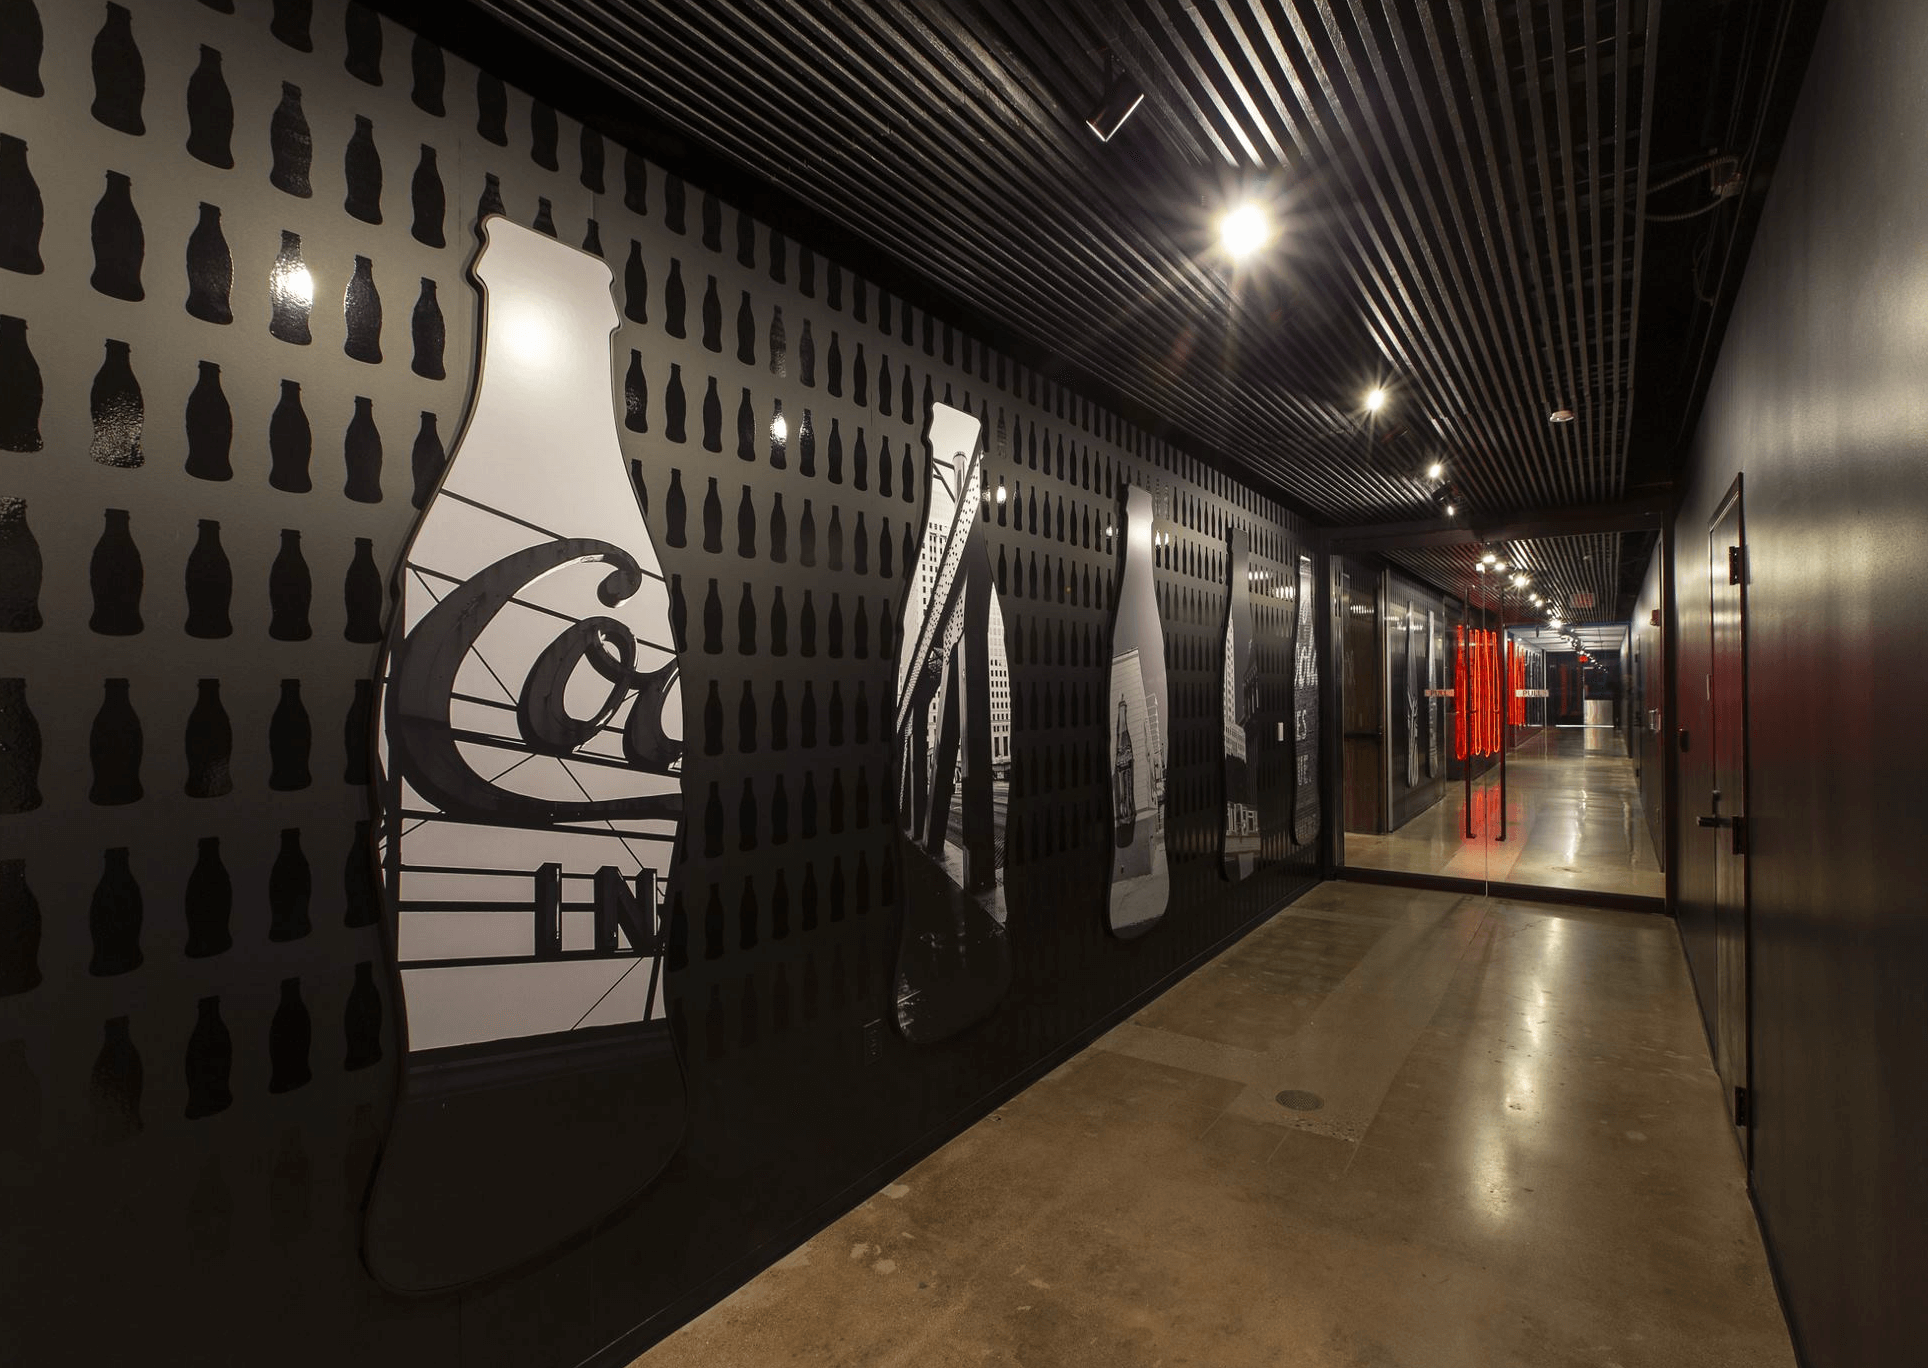 coca-cola bottles line a long hallway in black and white images and neon shapes